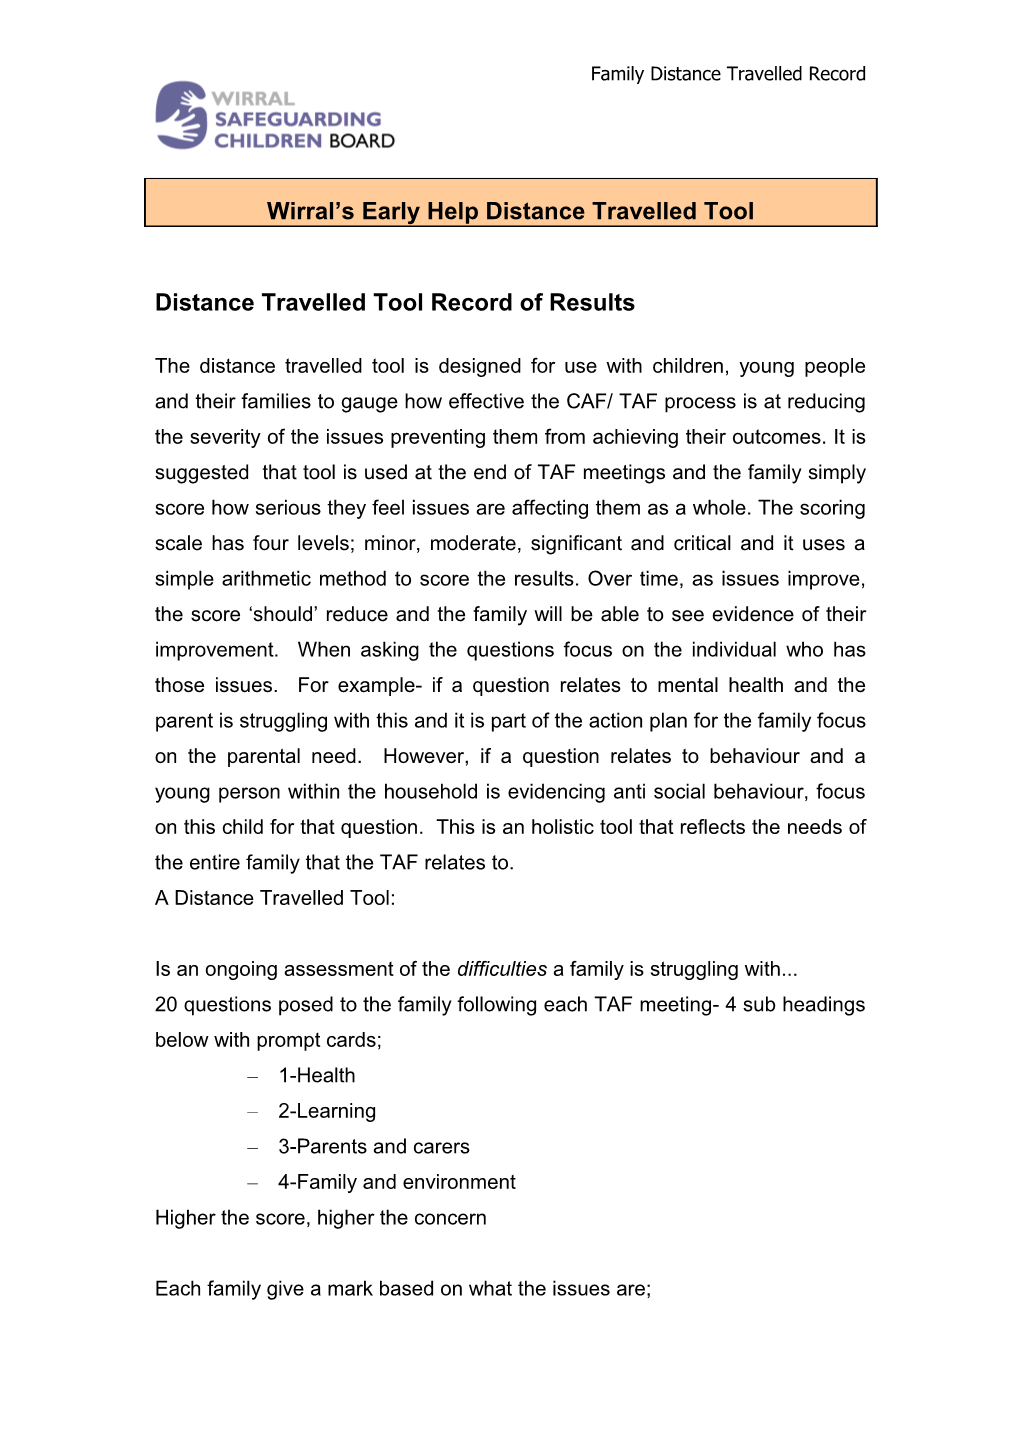 Example of Completed Distance Travelled Tool with a Case Study at the End